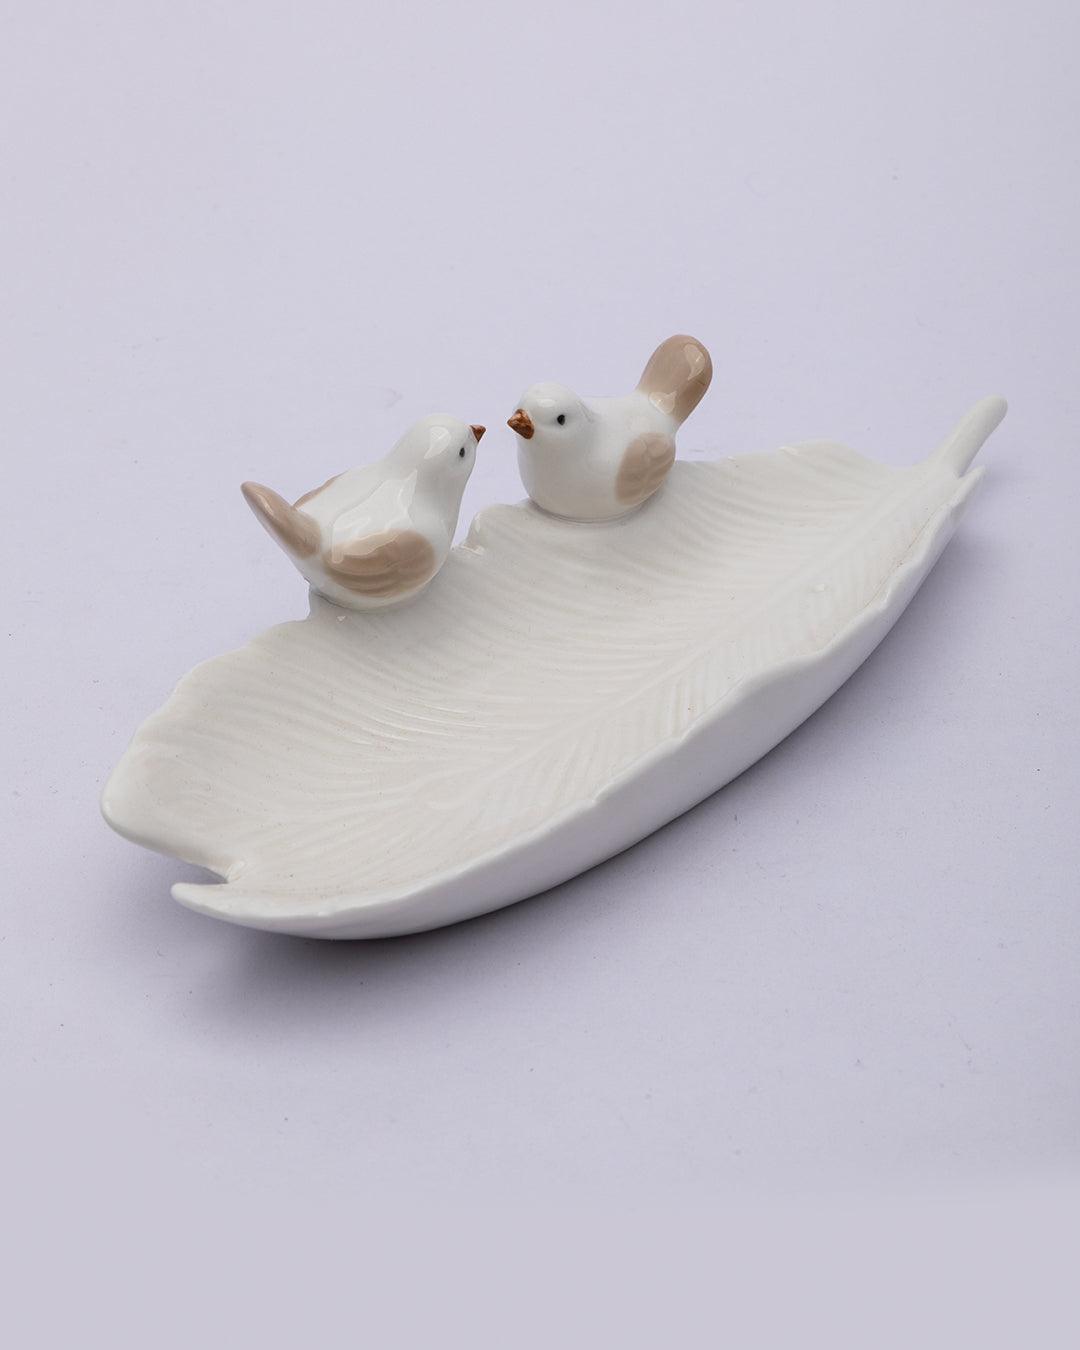 Jewellery Holder Tray, Crafted Bird, for Dressing Table, Ring Dash, Rectangular, White, Ceramic - MARKET 99